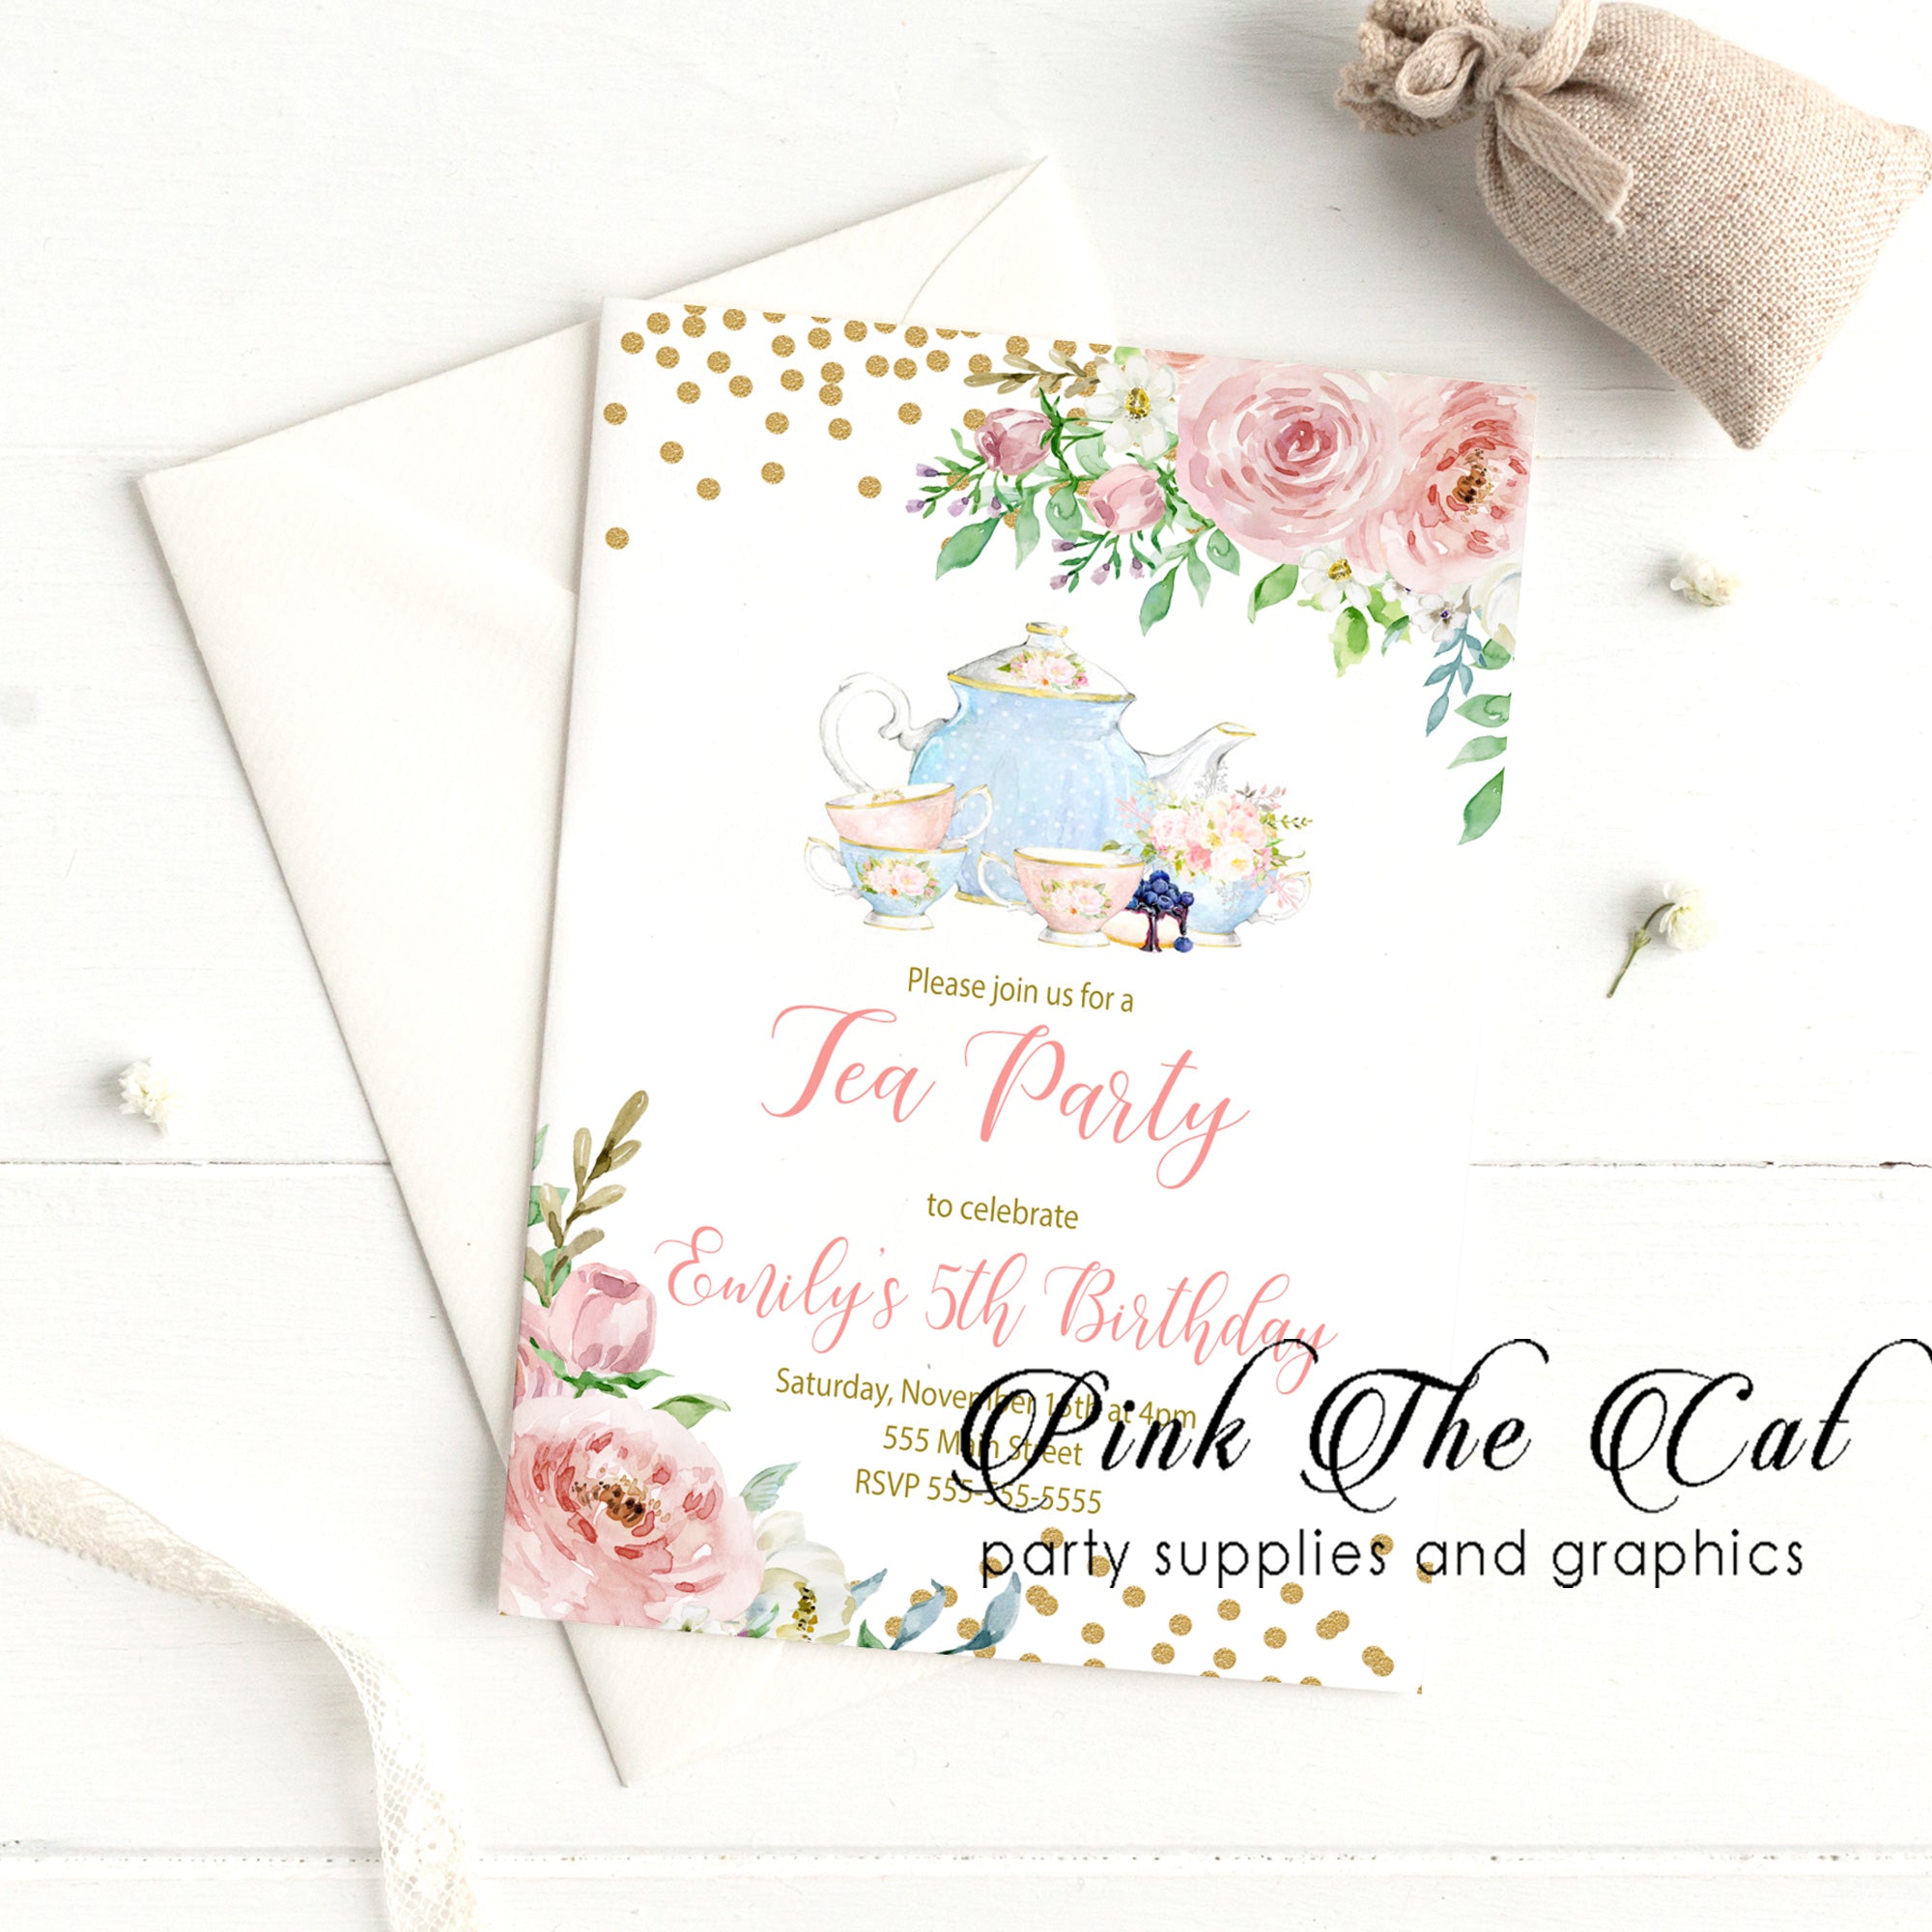 Tea party invitation watercolor floral blush pink gold girl birthday